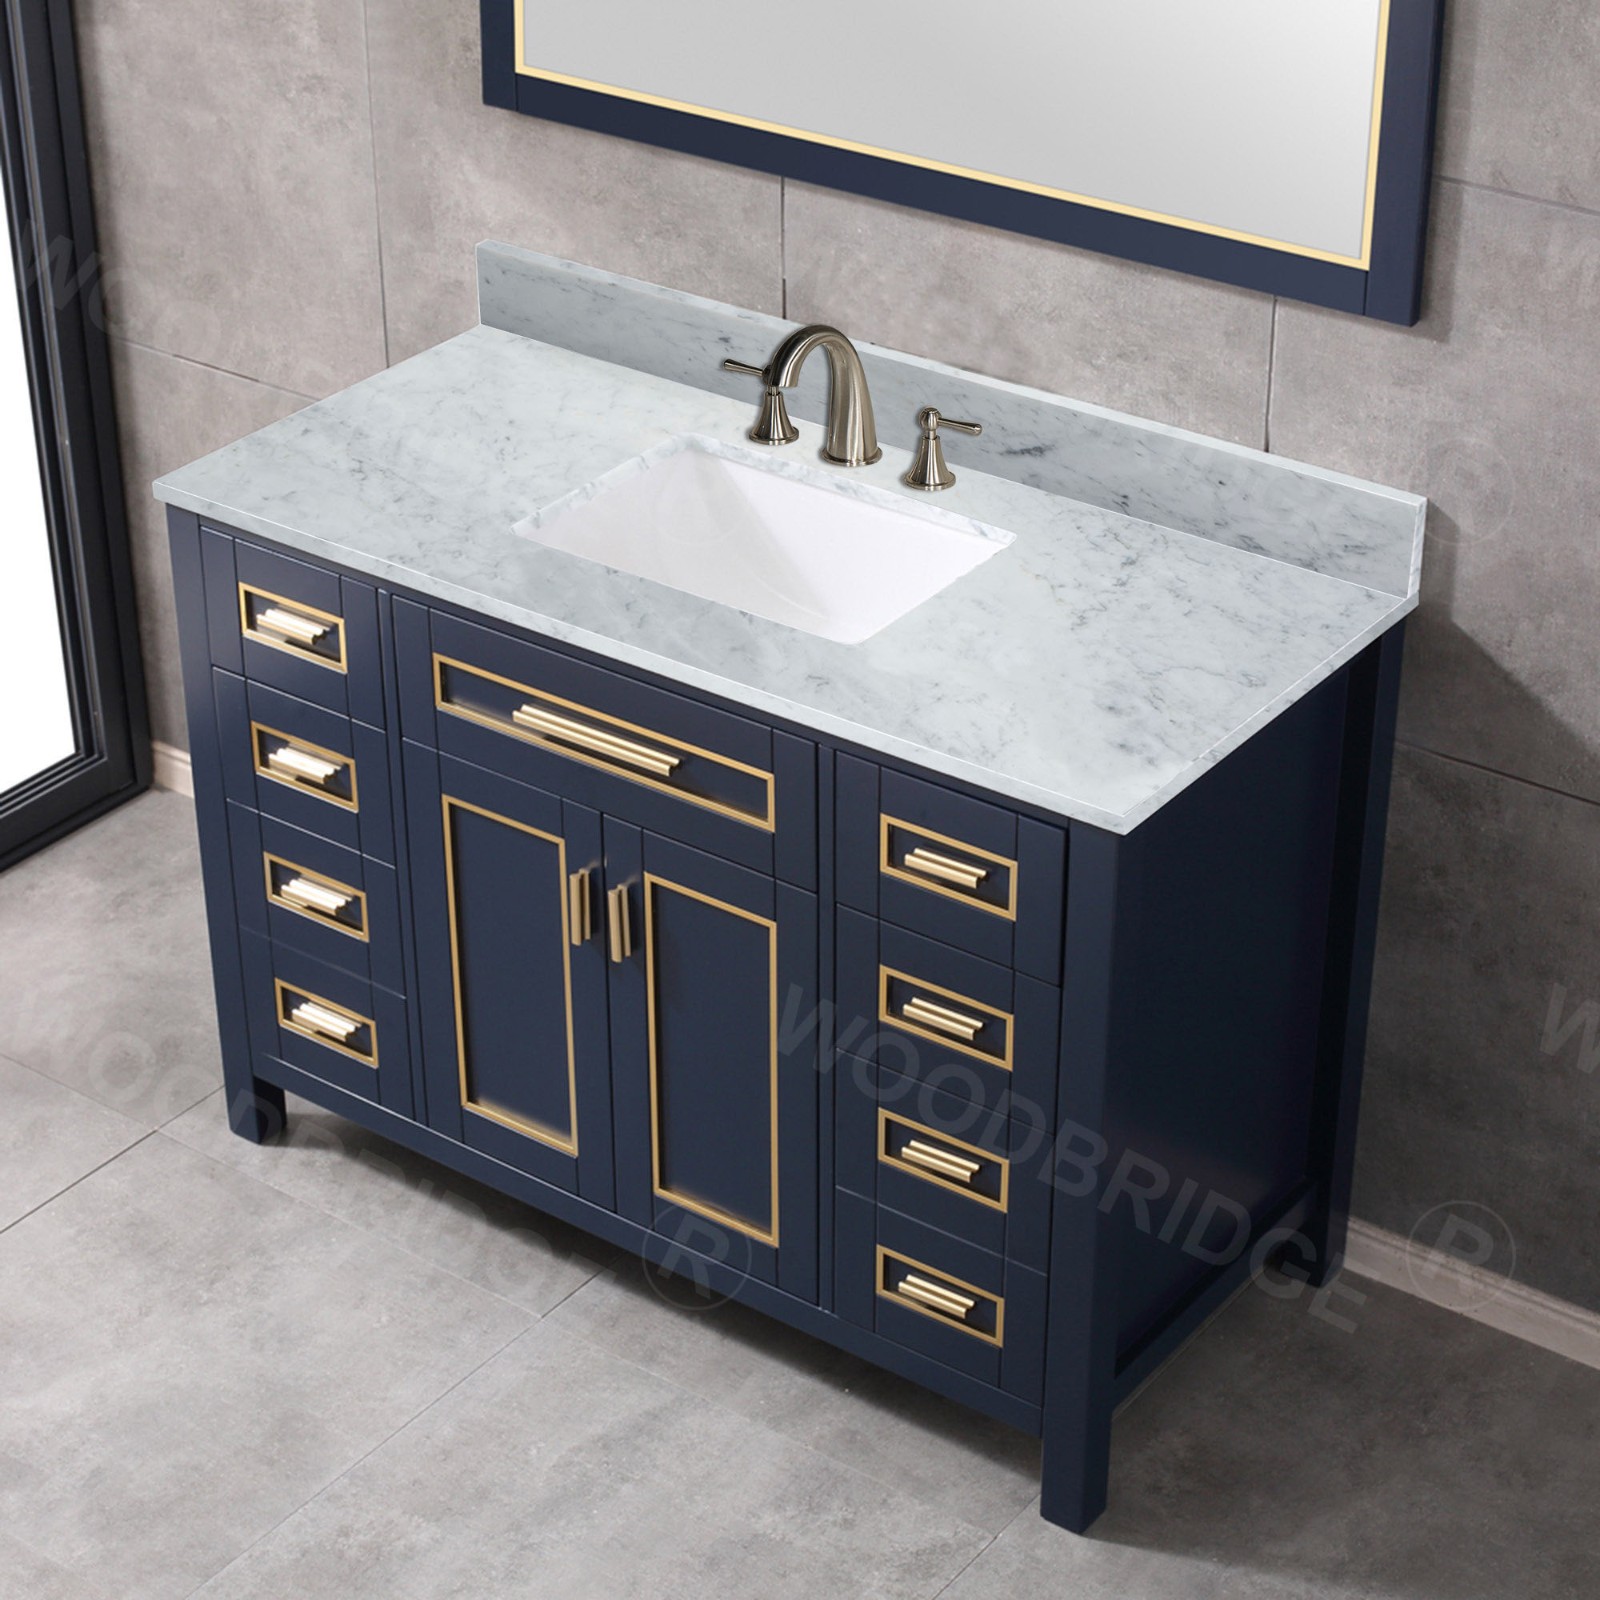  WOODBRIDGE Milan  49” Floor Mounted Single Basin Vanity Set with Solid Wood Cabinet in Navy Blue, and Carrara White Marble Vanity Top with Pre-installed Undermount Rectangle Bathroom Sink in White, Pre-Drilled 3-Hole for 4-inch Centerset Faucet_4739